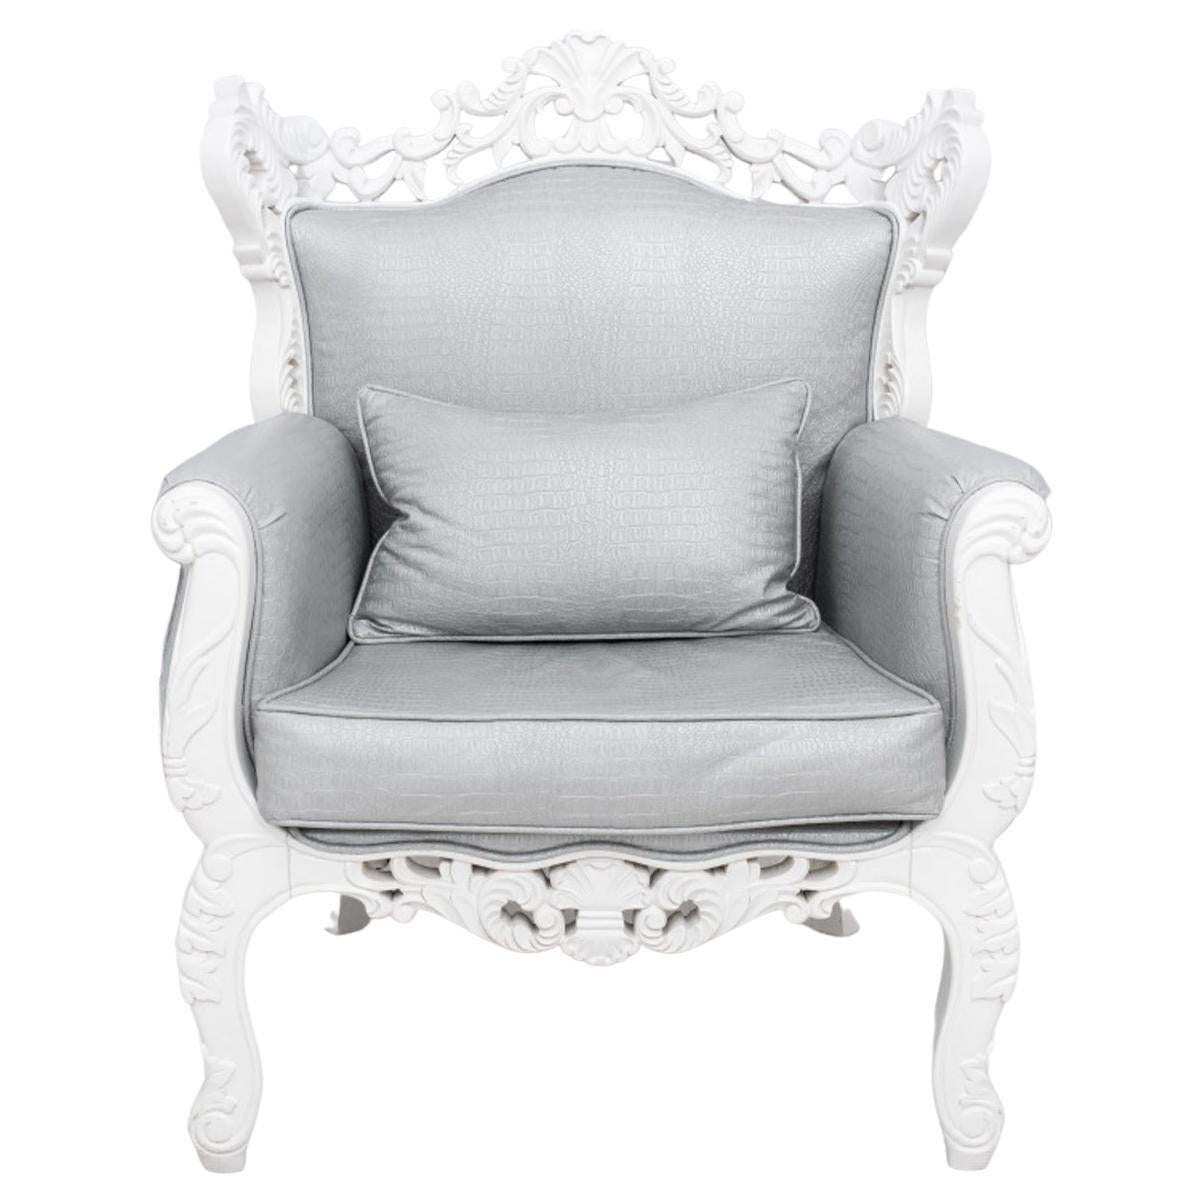 Baroque Revival White Faux Alligator Skin Armchair For Sale